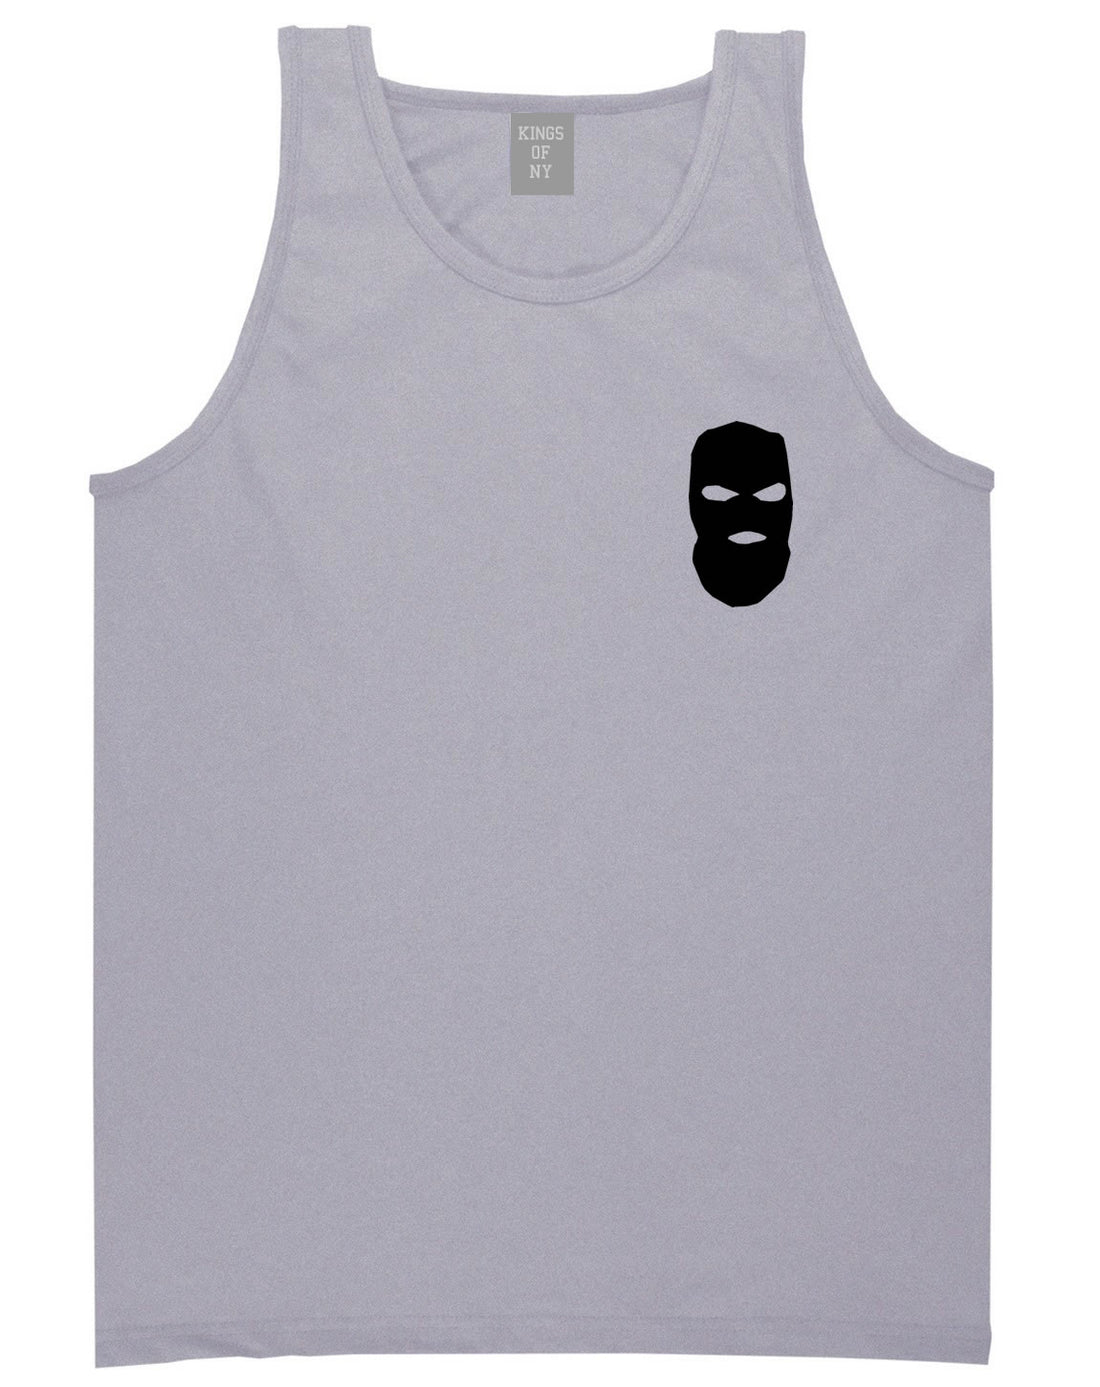 Ski Mask Way Robber Chest Logo Tank Top in Grey By Kings Of NY